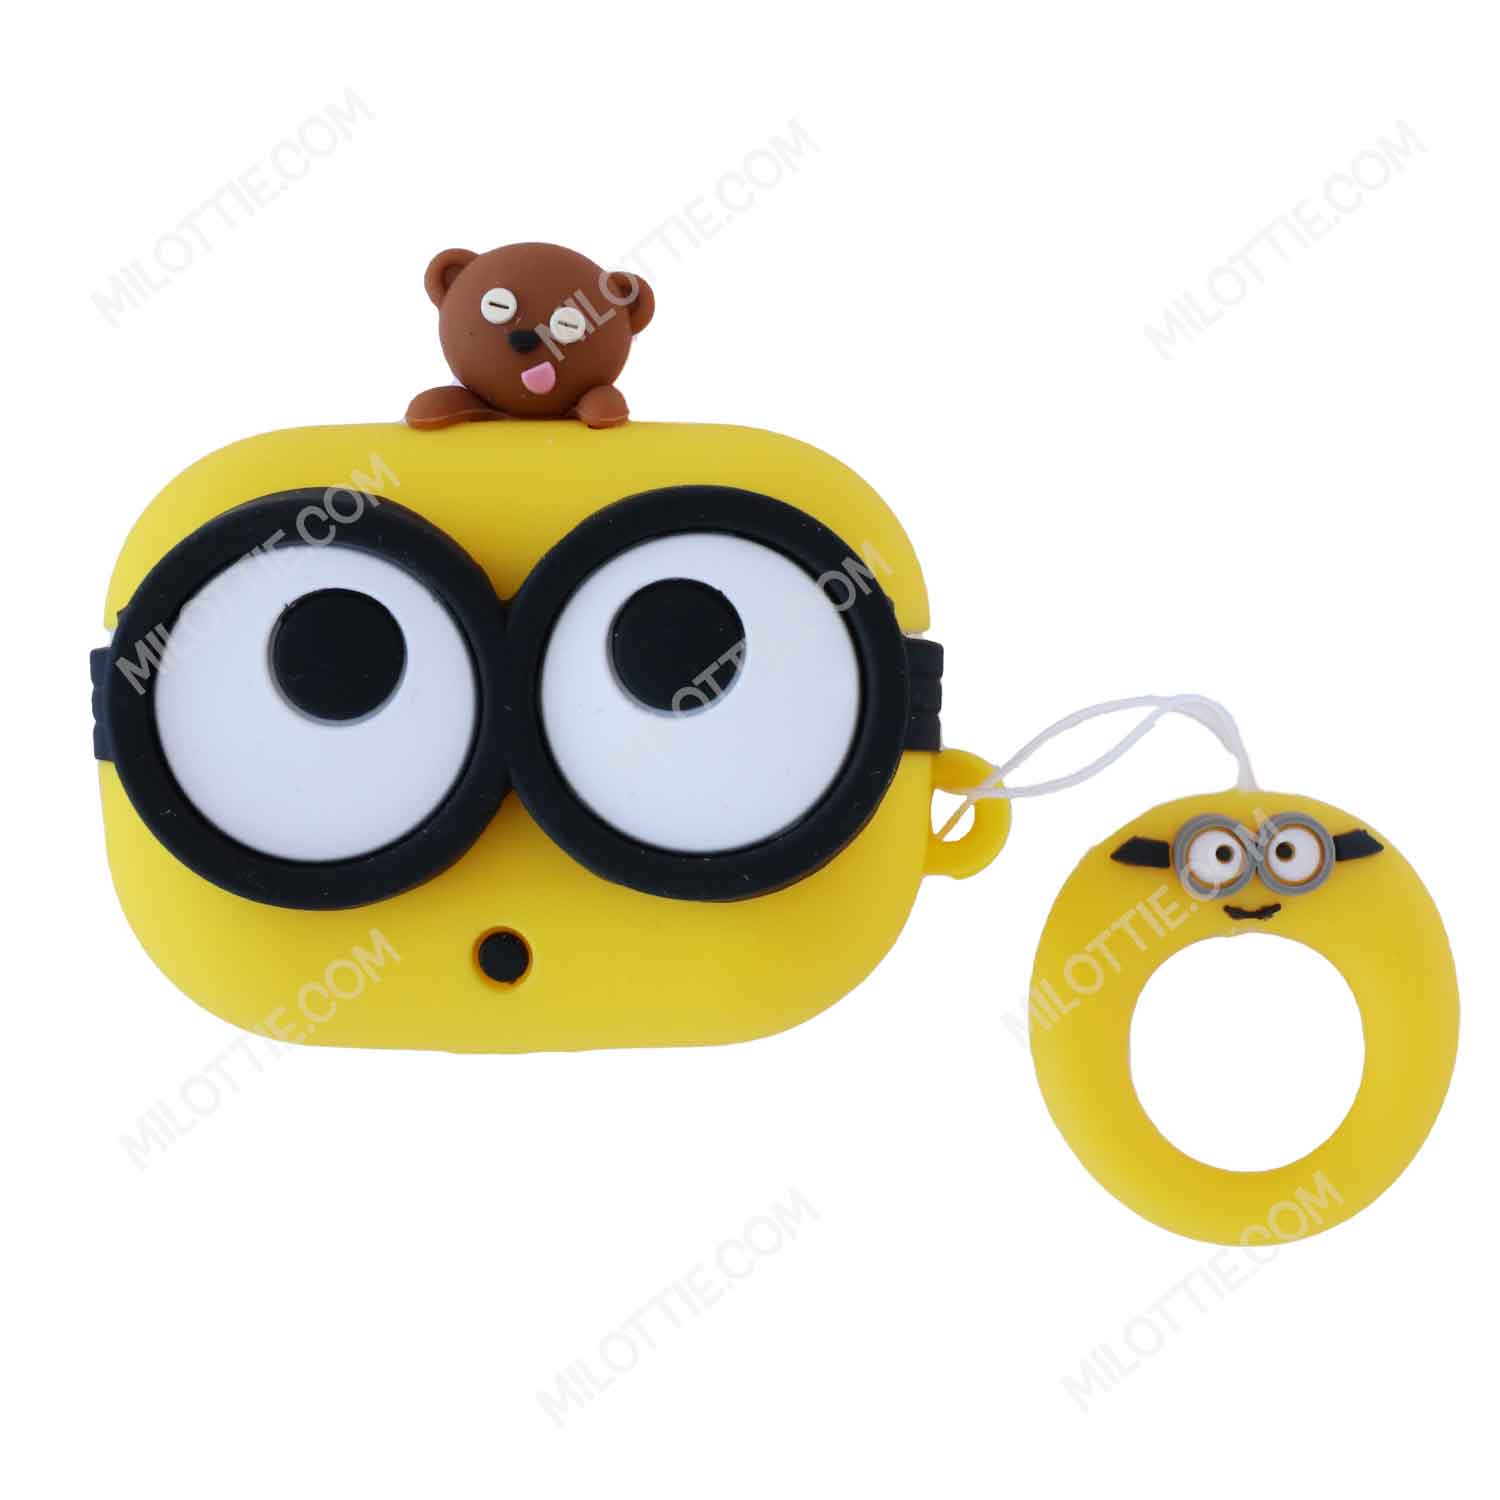 Minion with Teddy Bear Despicable Me Airpods Case - 0